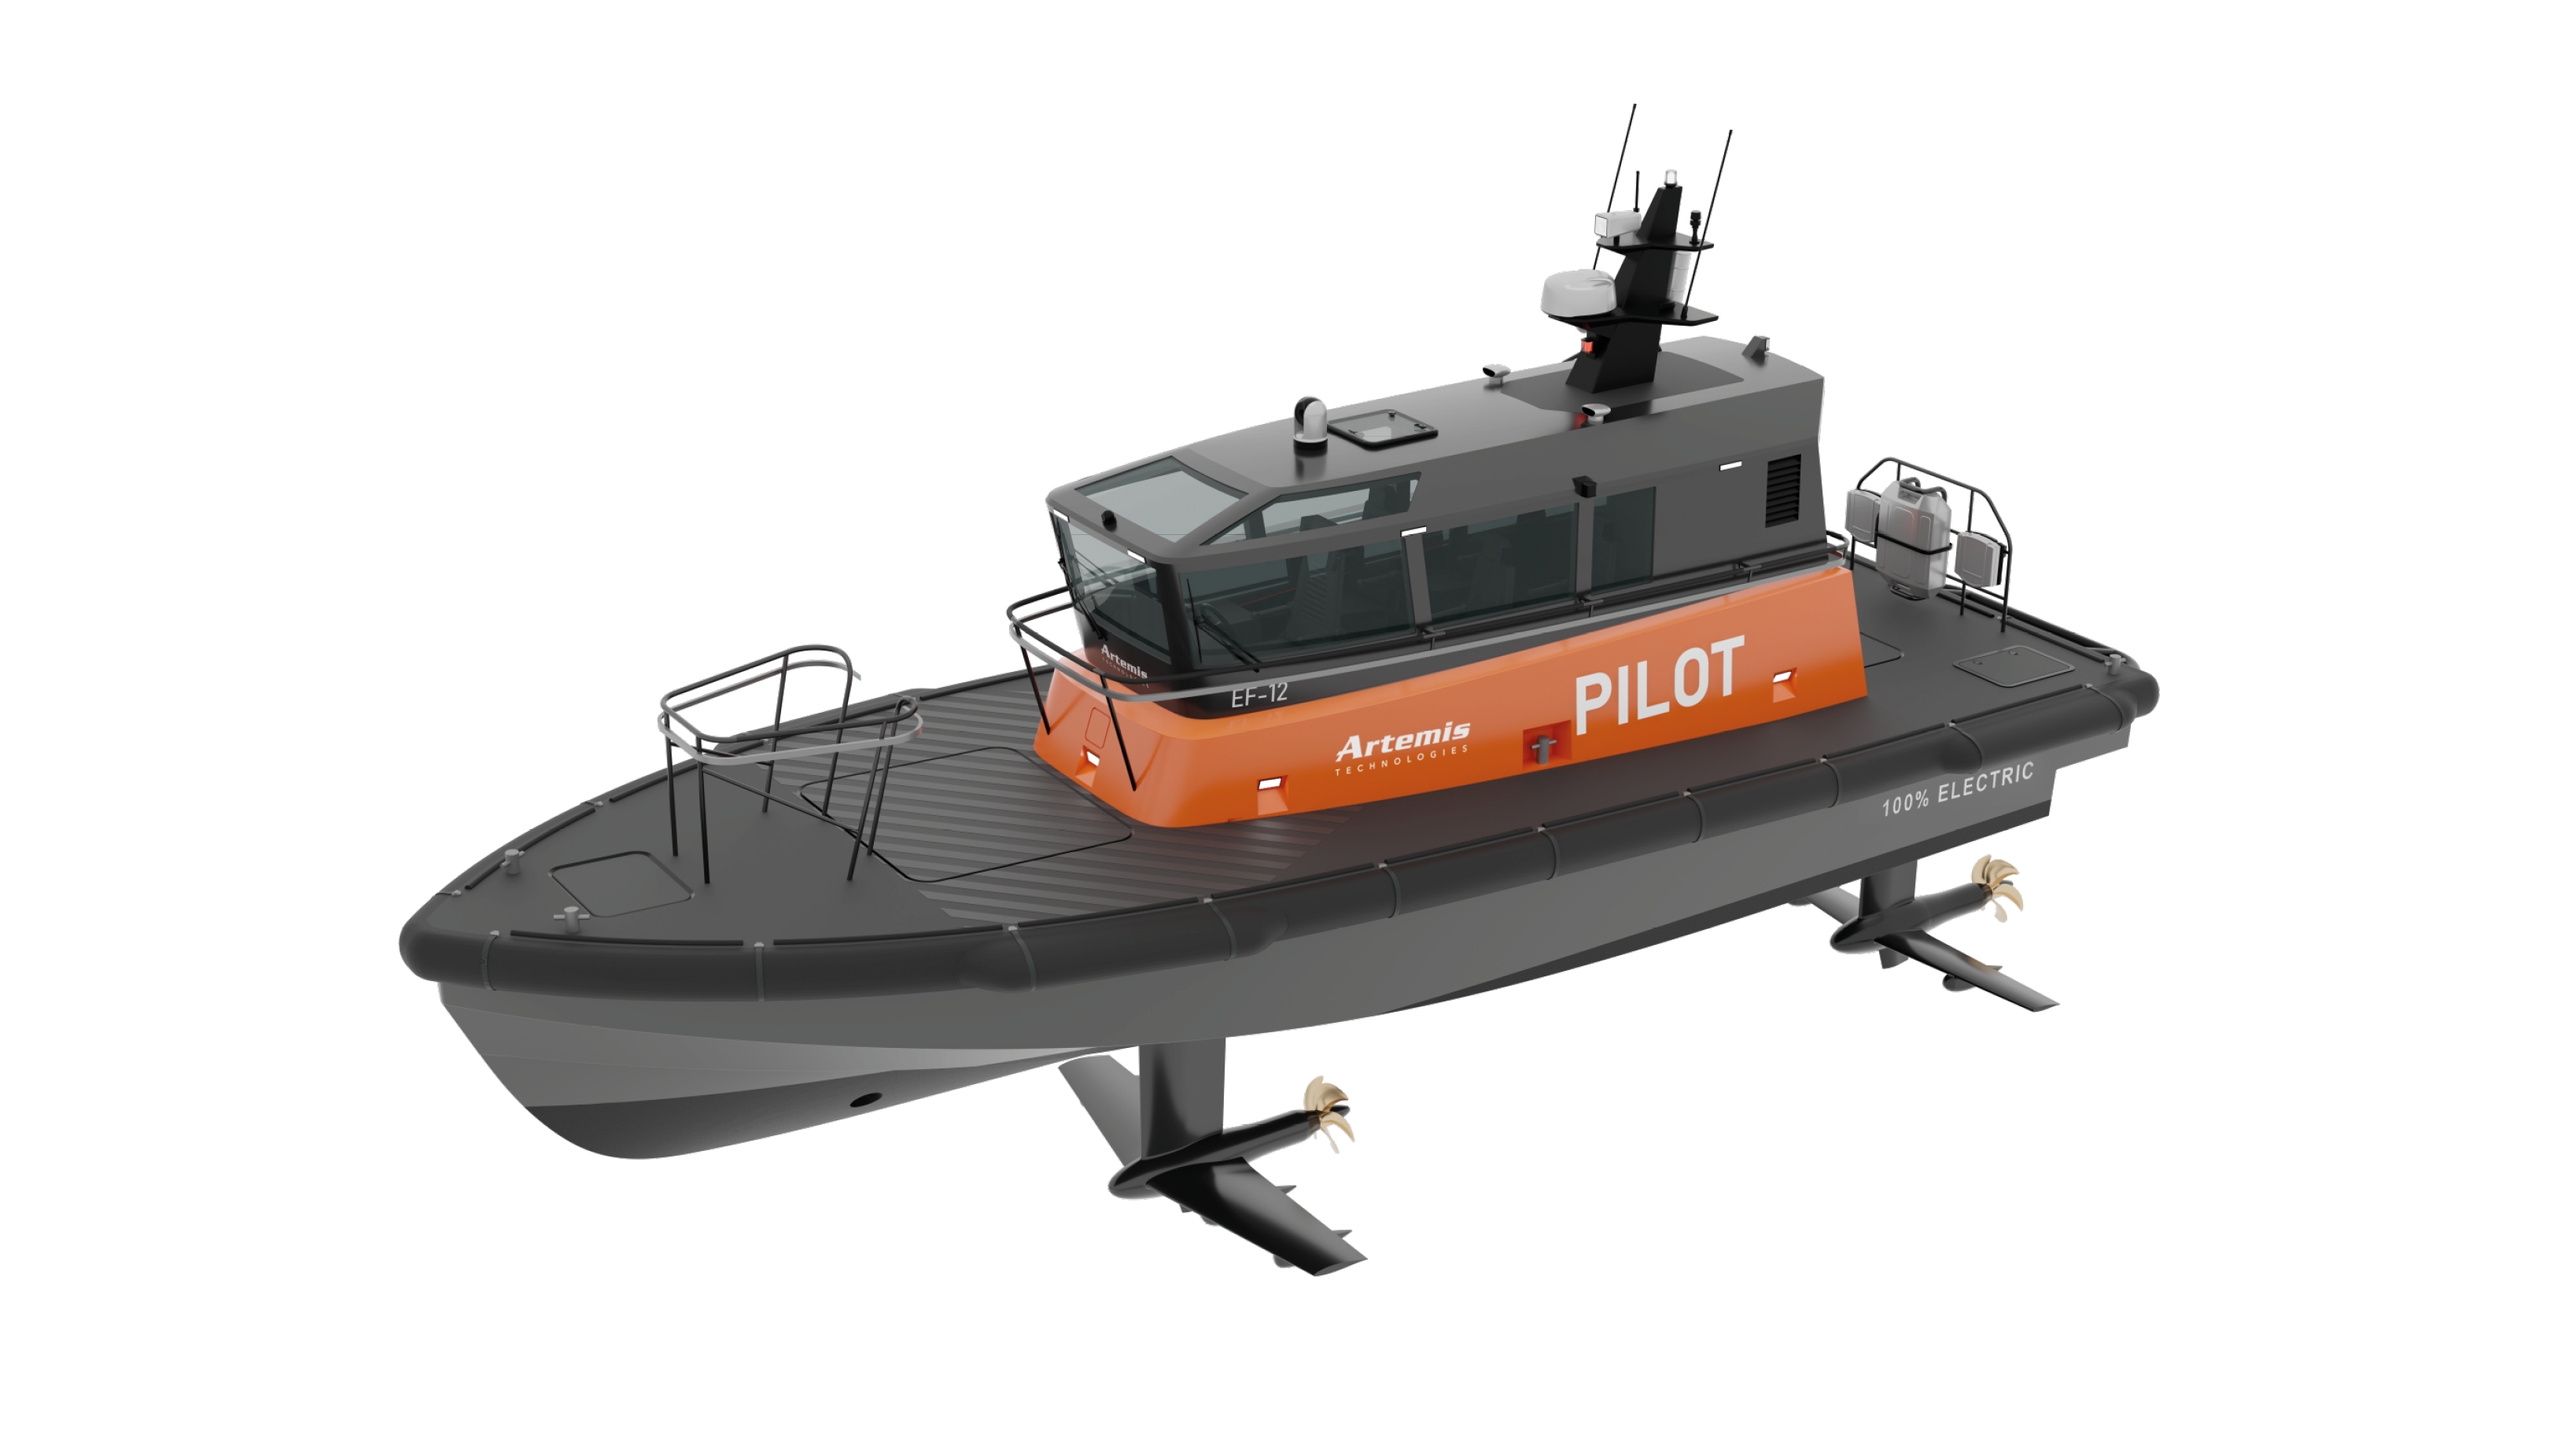 Front side view of the dual propulsion Artemis EF-12 Pilot boat